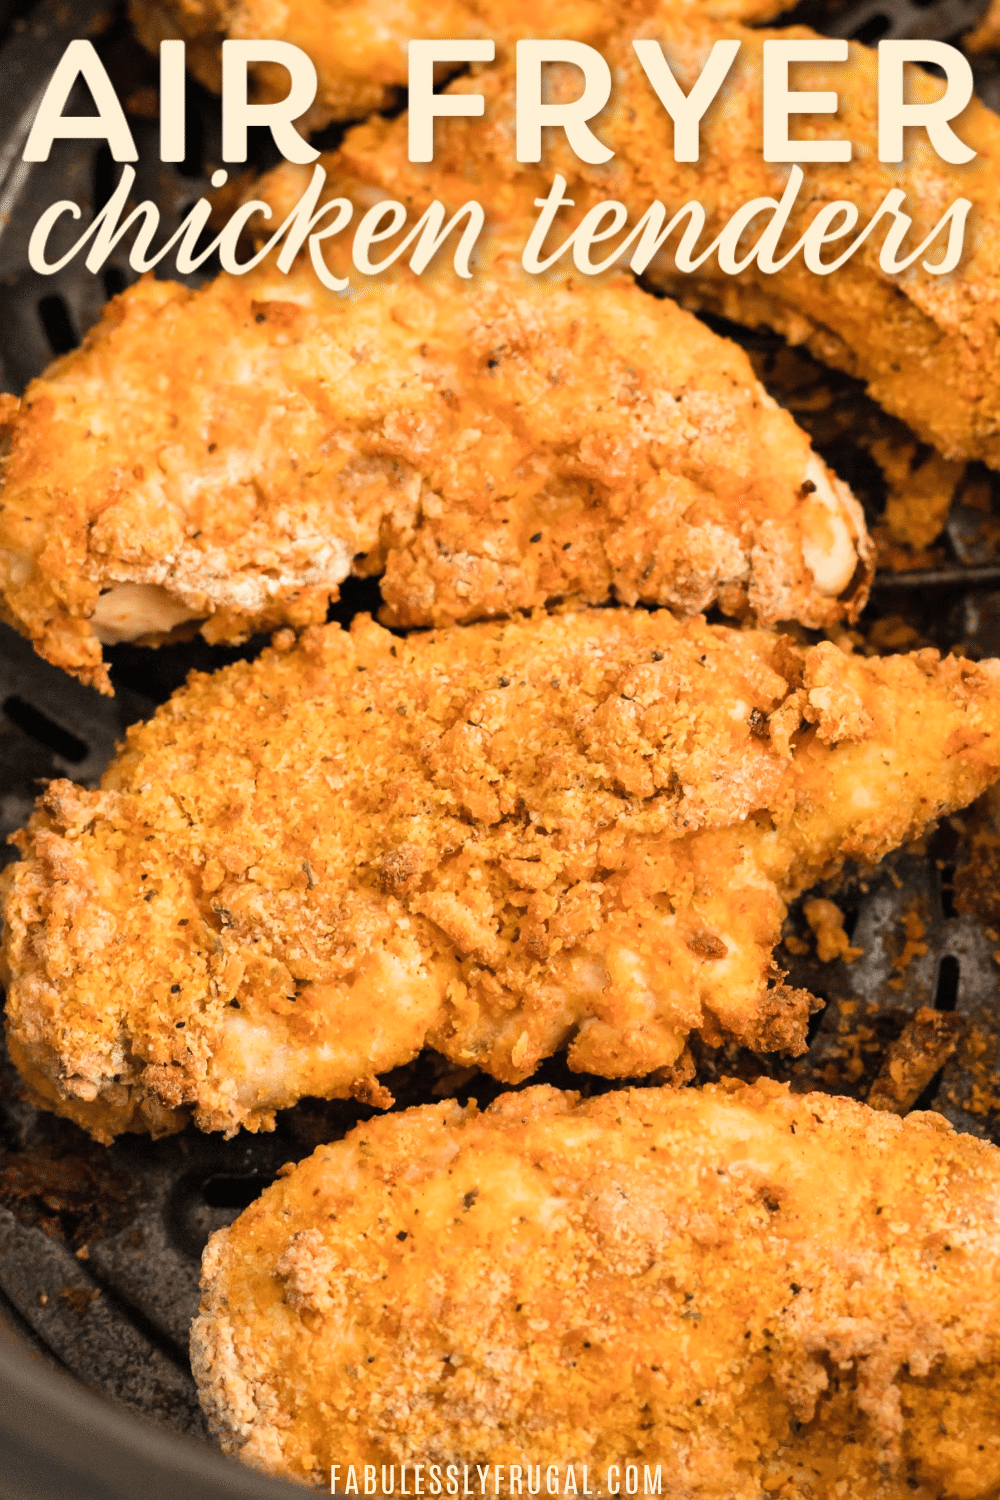 How to air fry chicken tenders